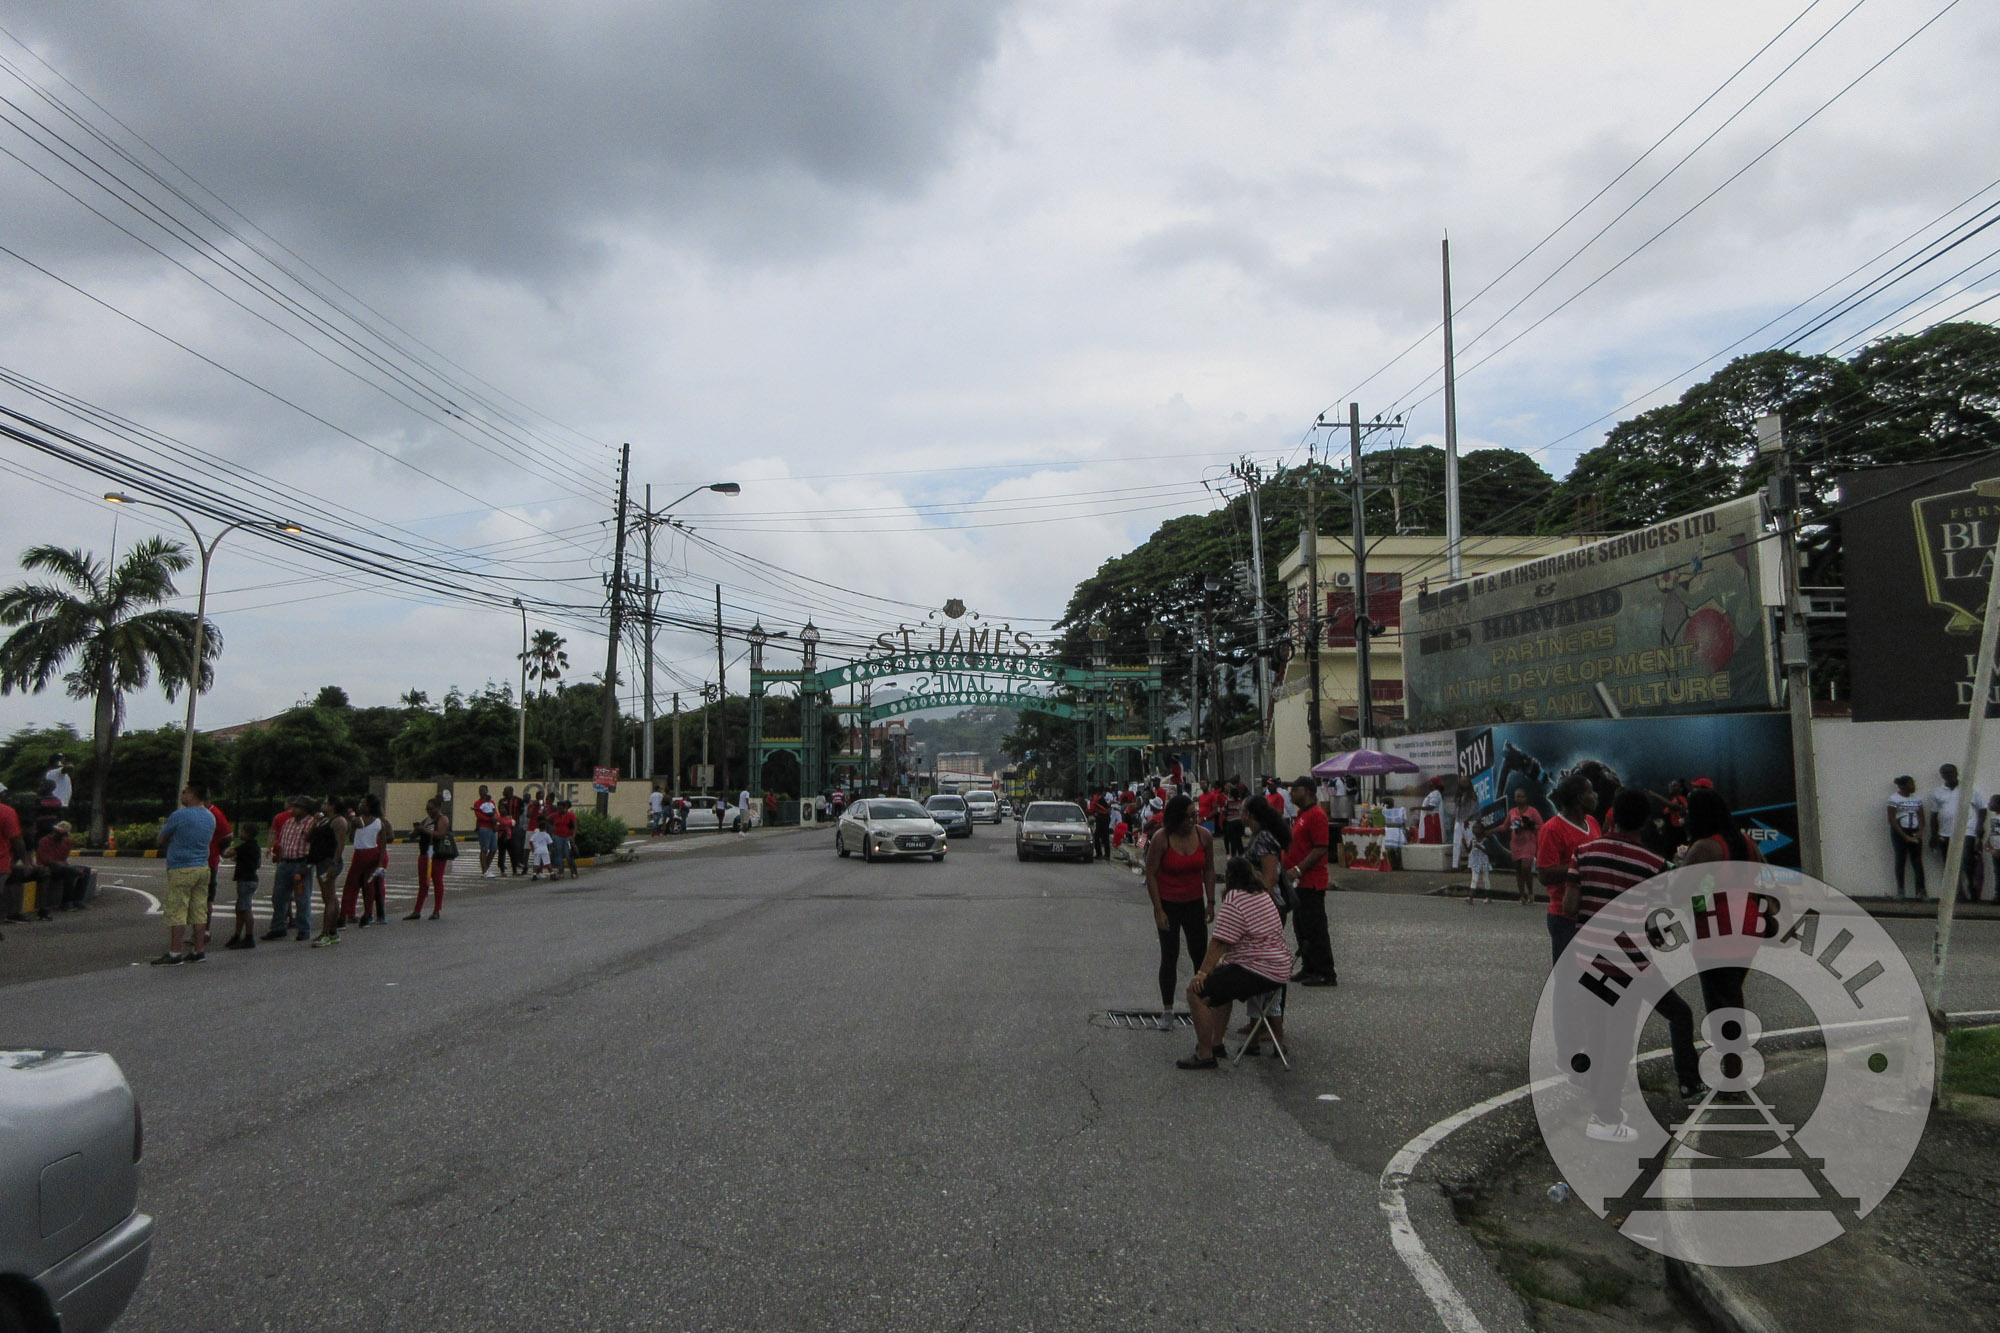 Independence Day Parade, Western Main Road, St. James, Port of Spain, Trinidad & Tobago, 2018.